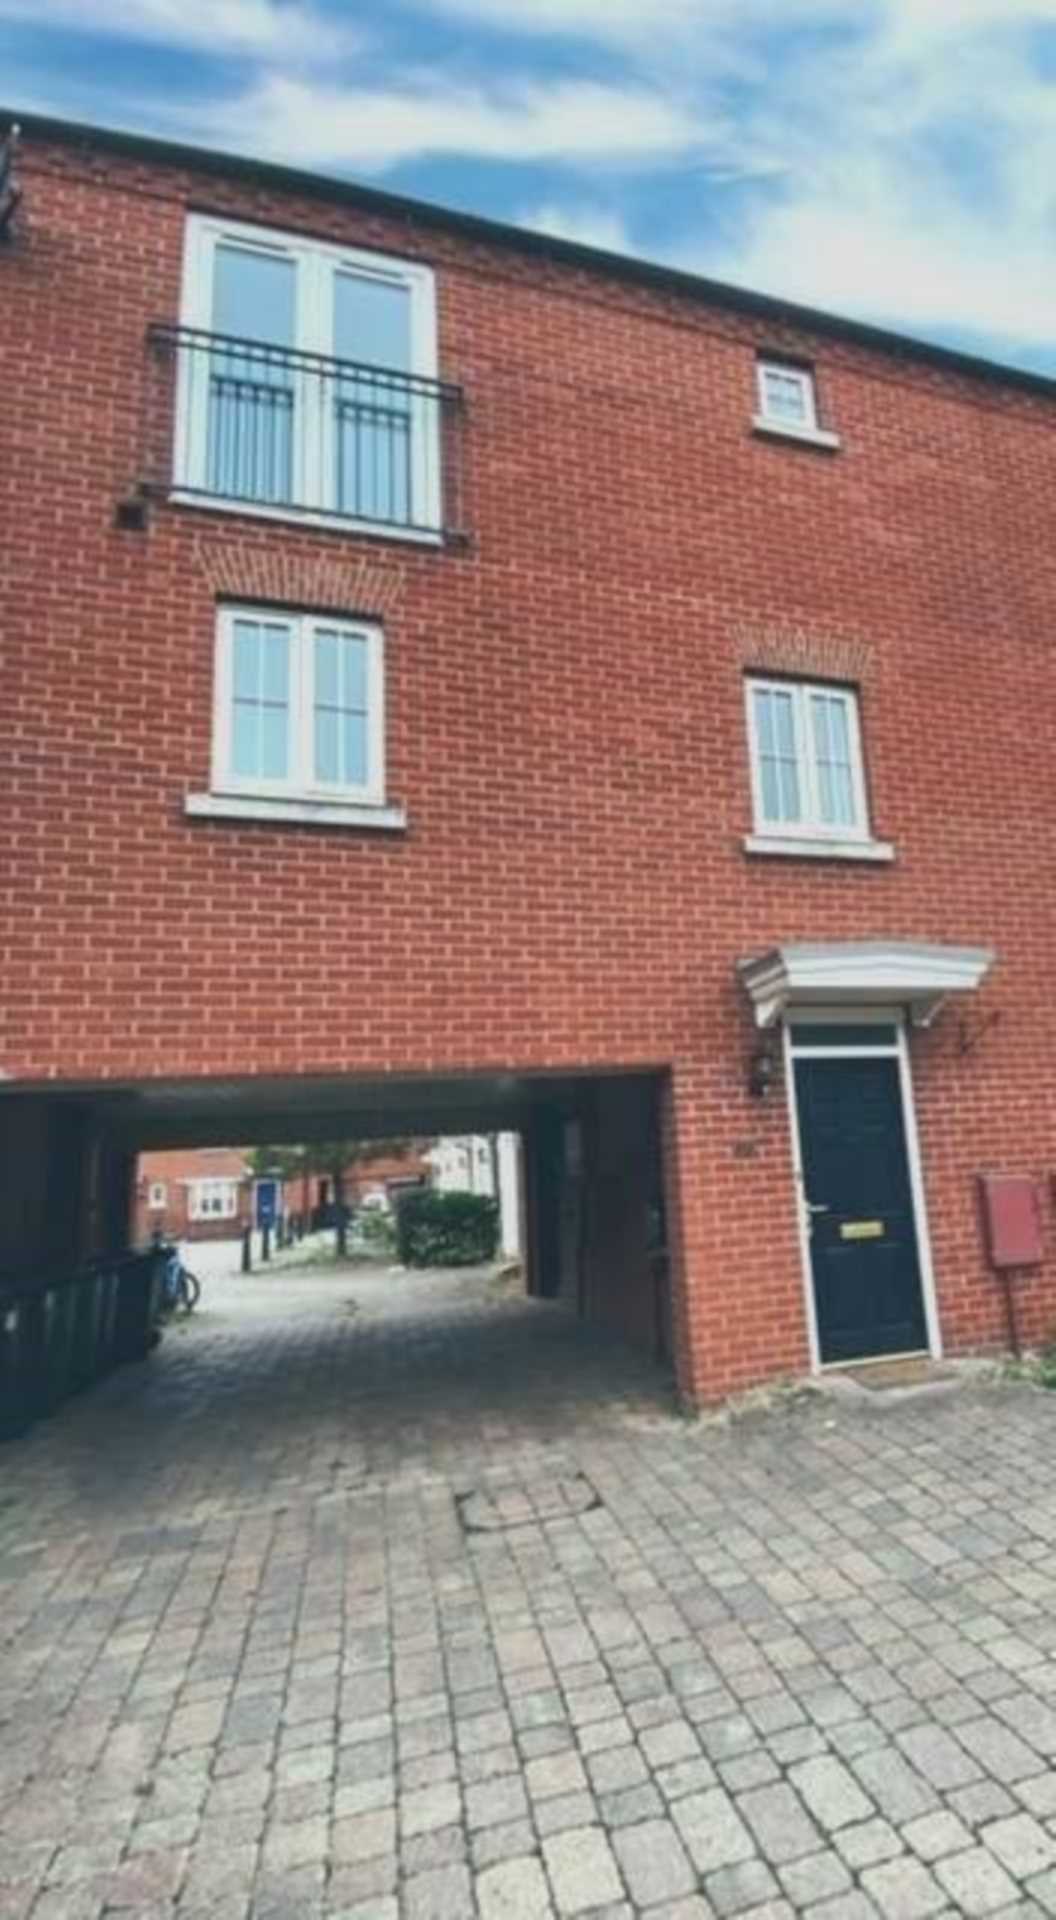 2 bed Mid Terraced House for rent in St Neots. From Noonan Crane Property Management